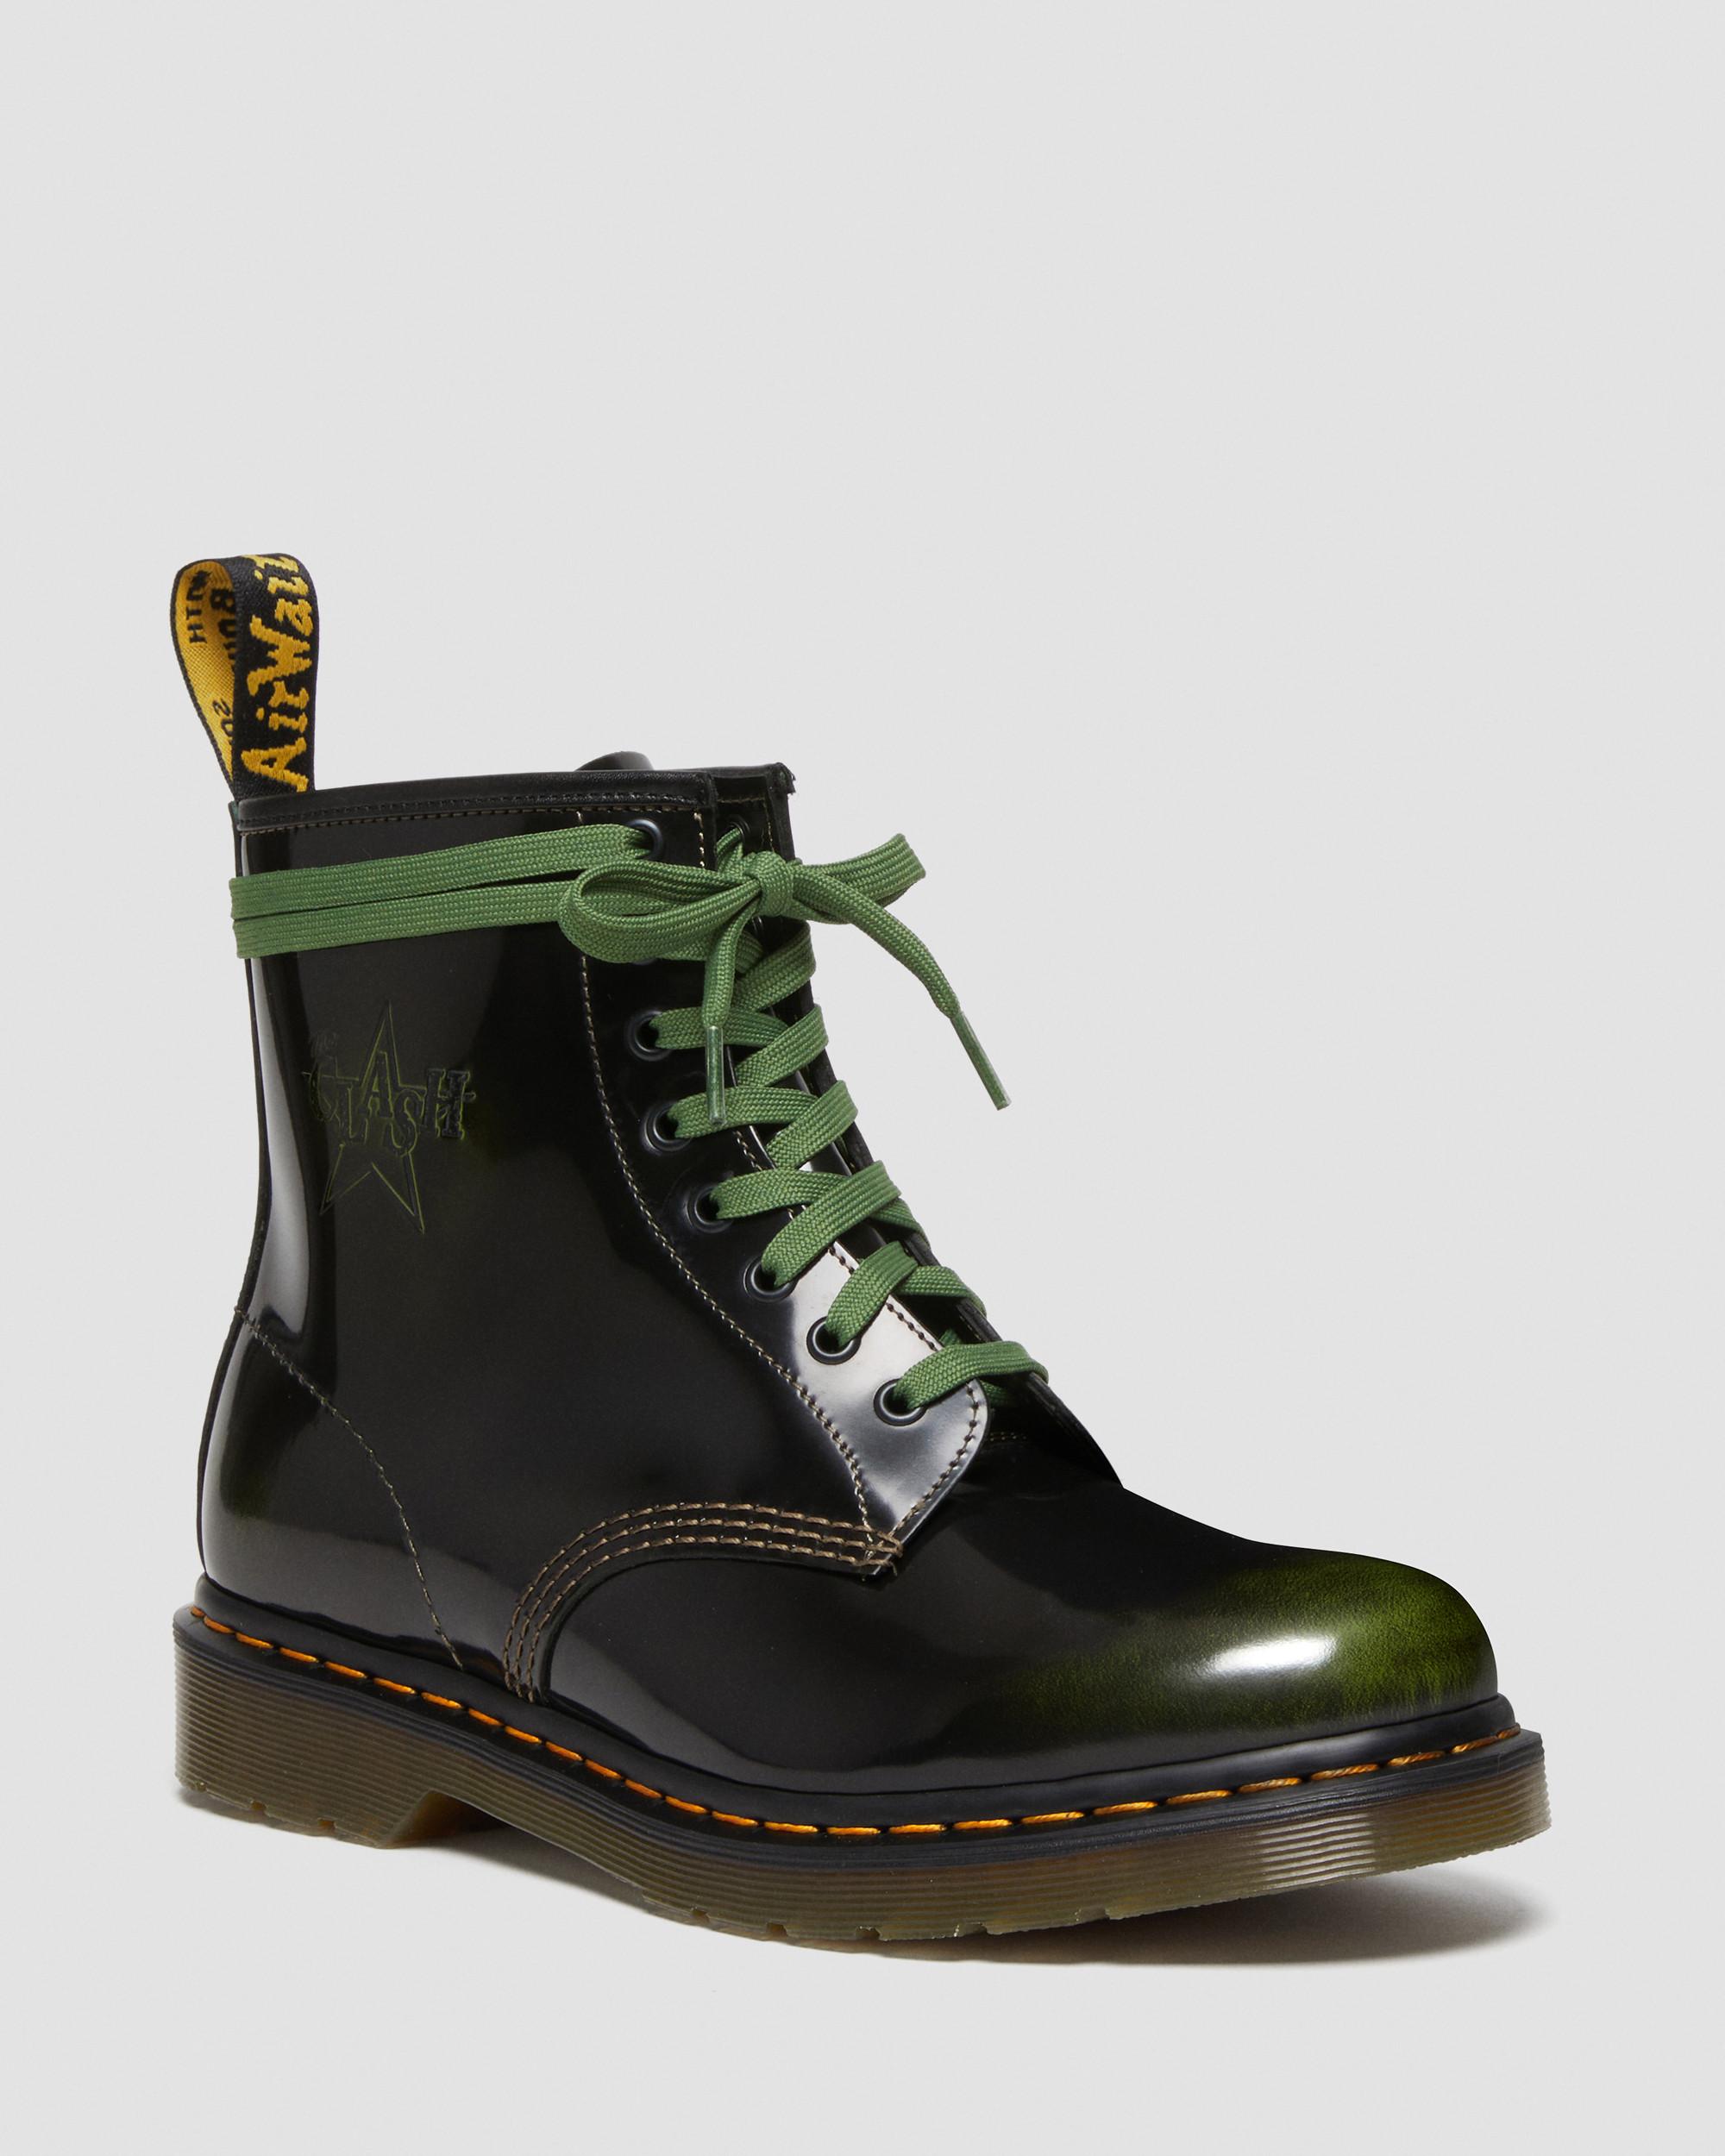 1460 The Clash Arcadia Leather Lace Up Boots, Army Green | Dr. Martens